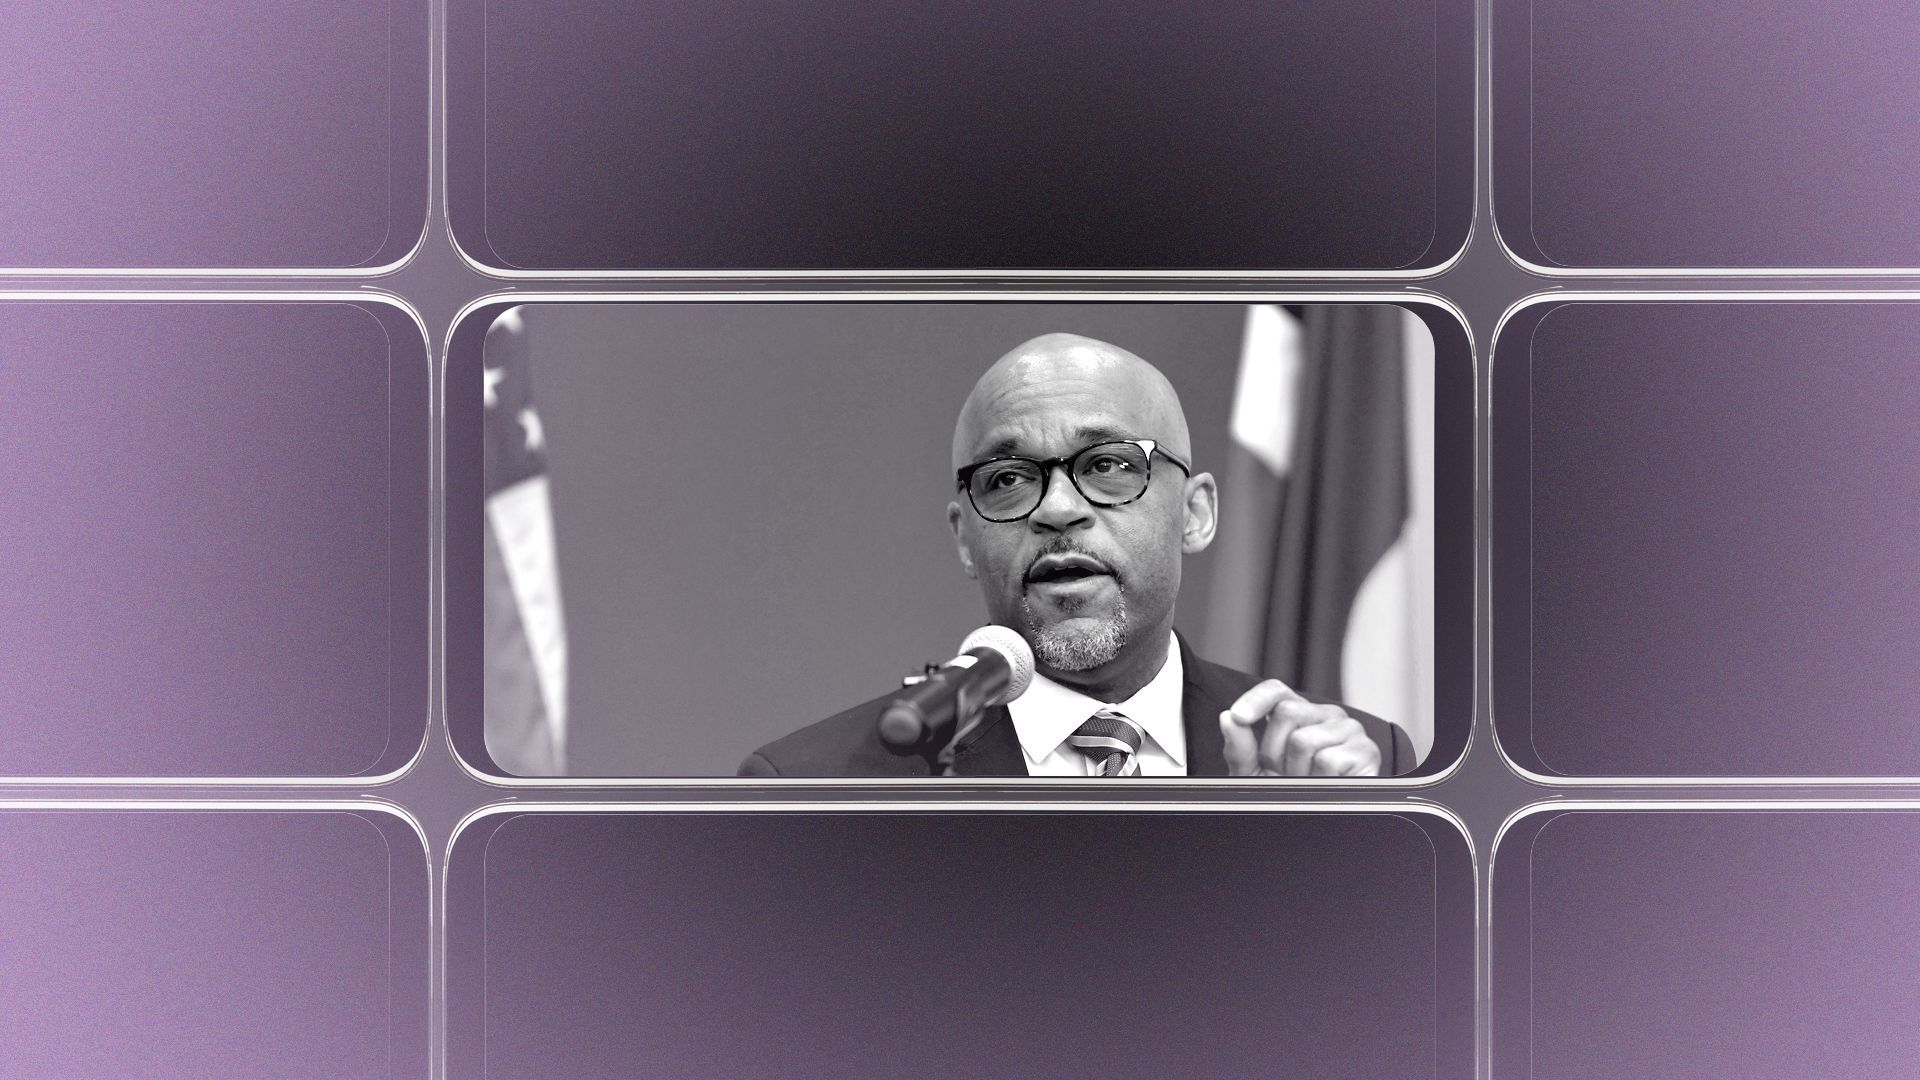 Photo illustration of a grid of smartphone screens, the center one showing an image of Denver Mayor Michael Hancock.